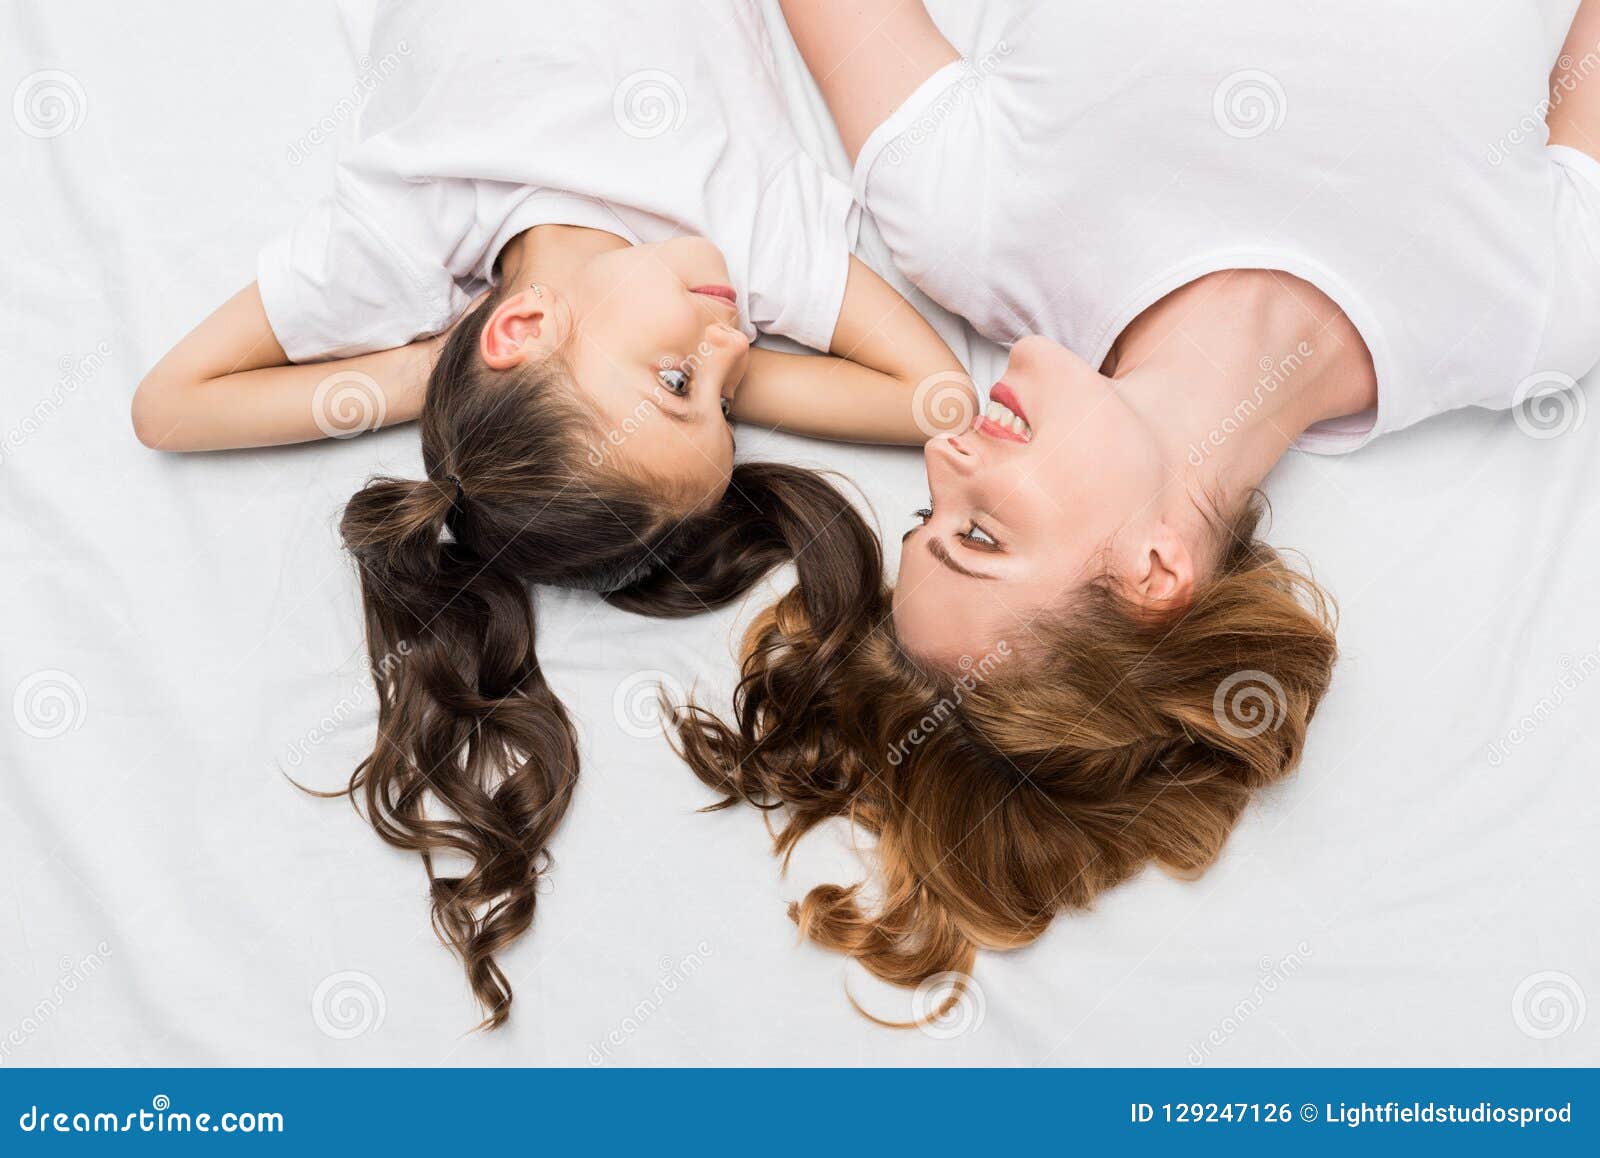 Overhead View Of Mother And Daughter Looking At Each Other While Lying